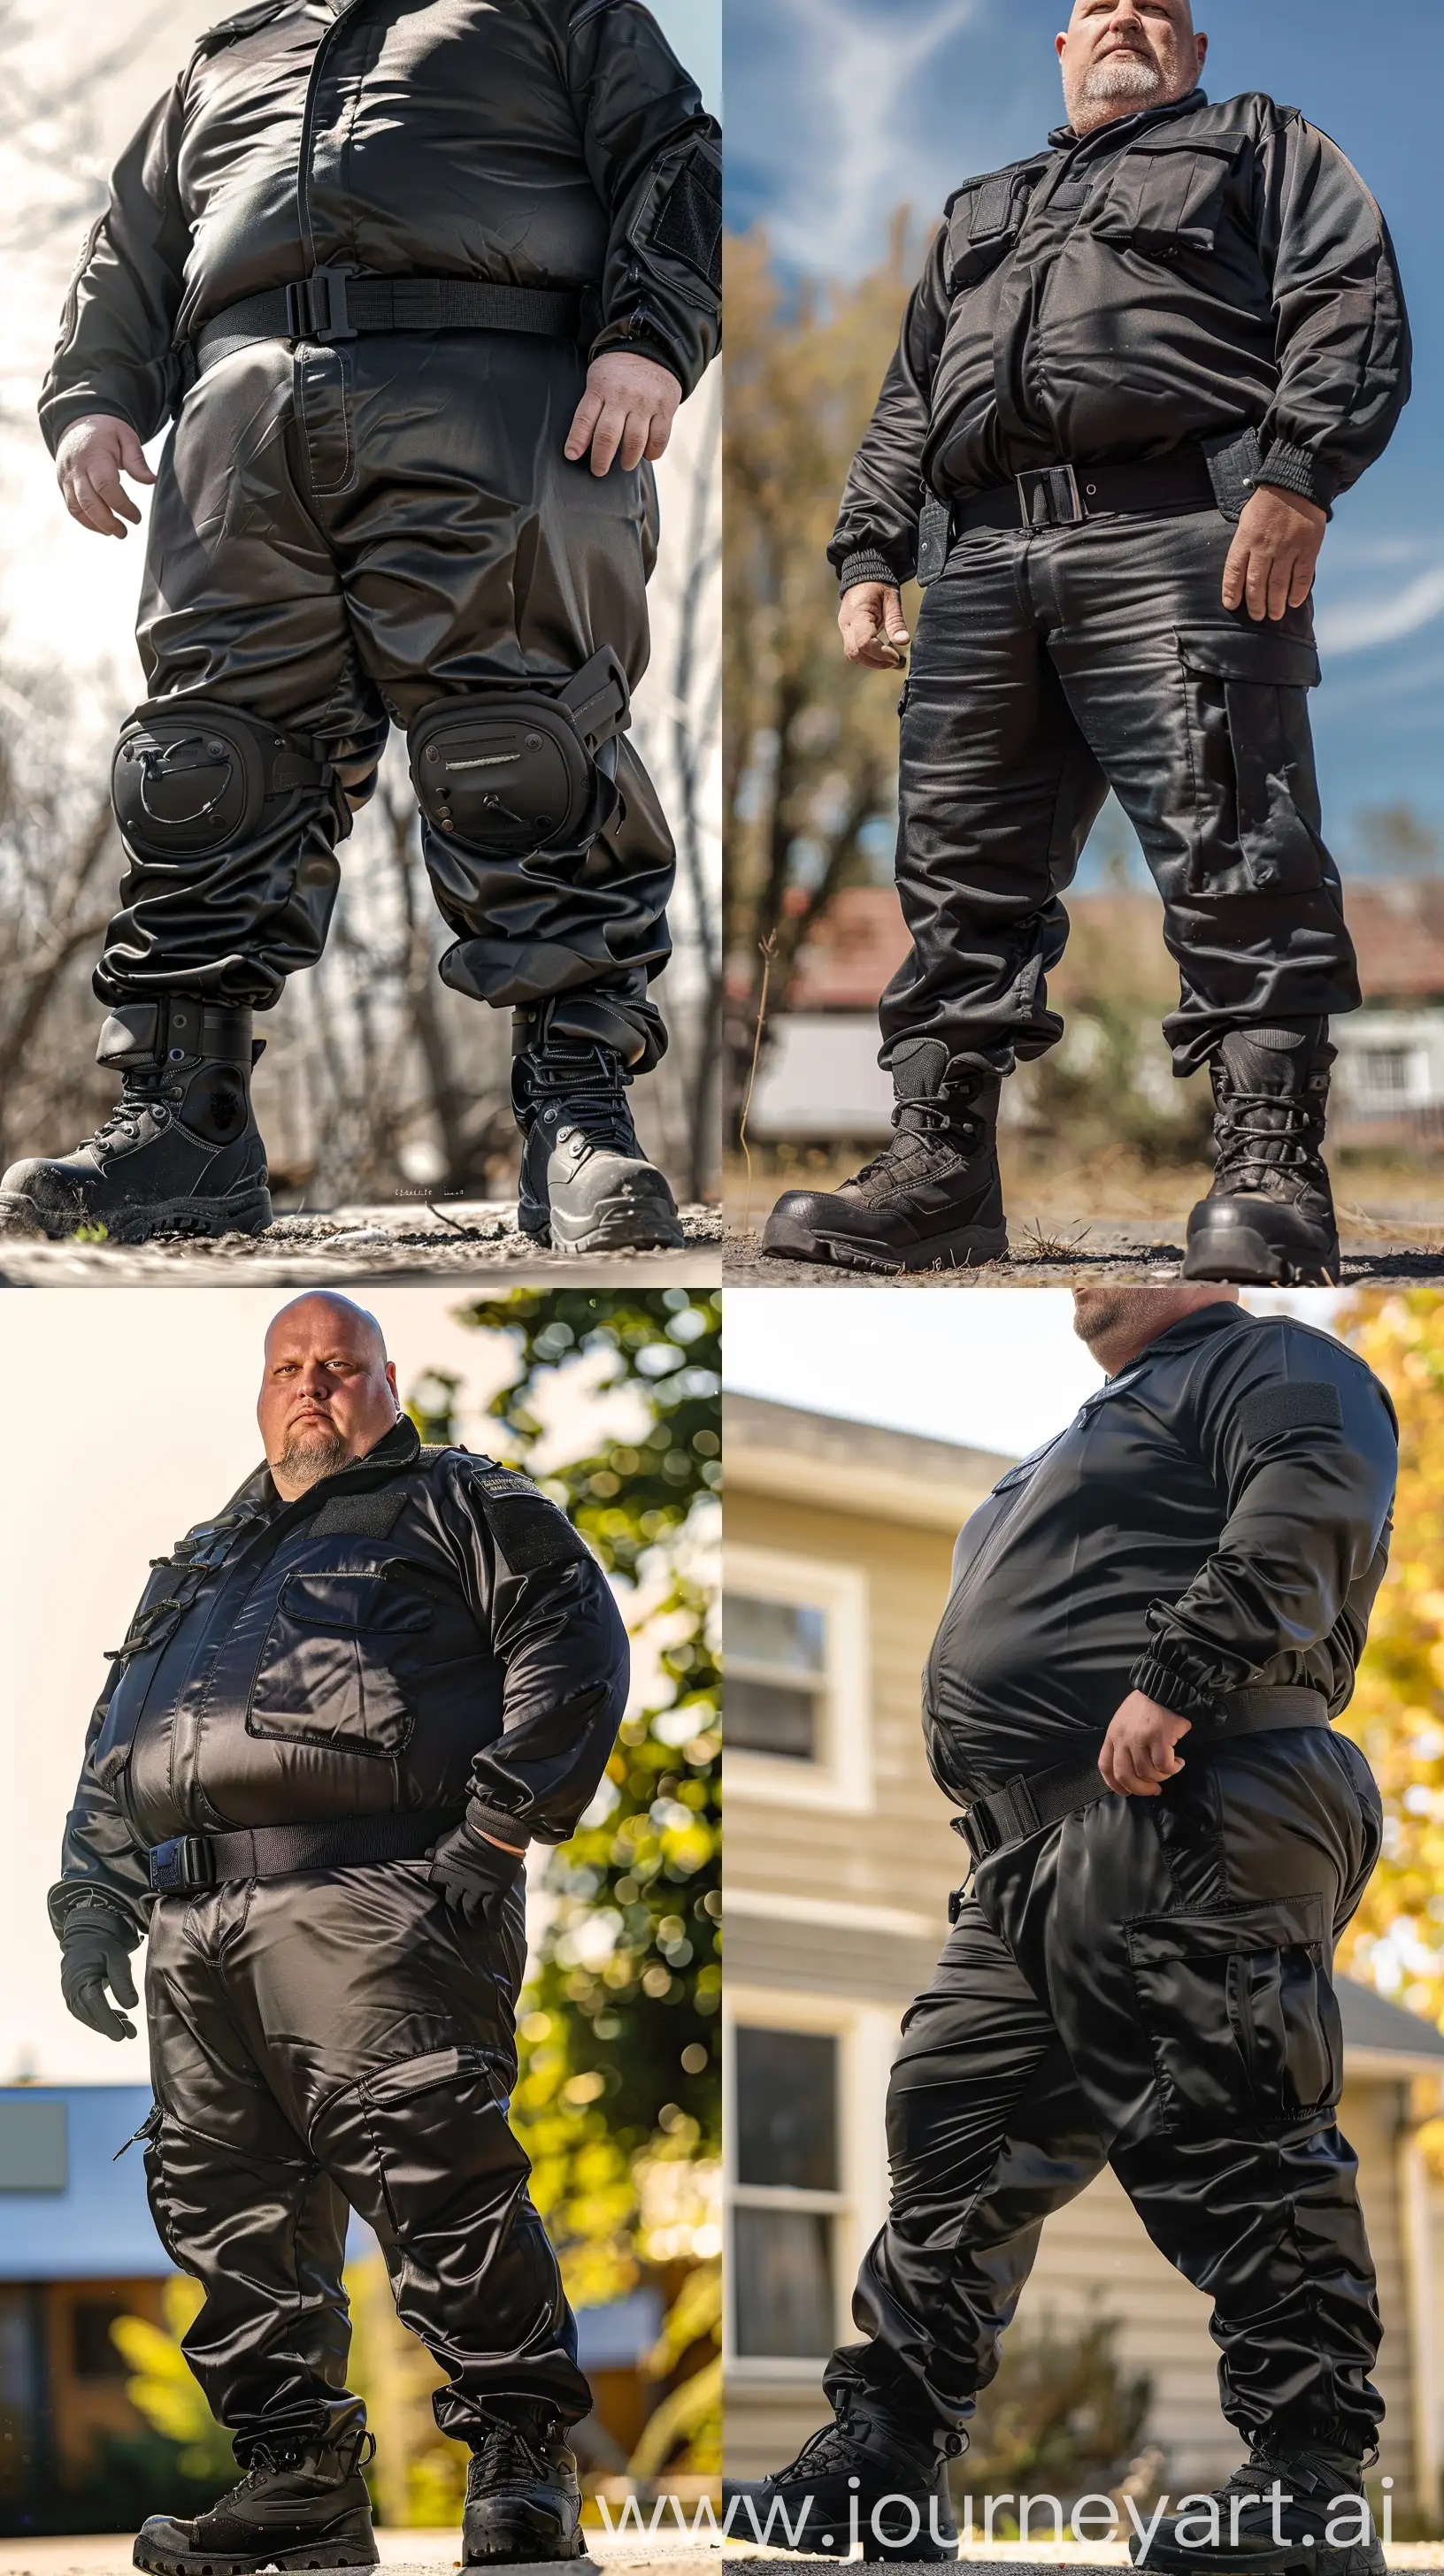 Bald-Security-Guard-Standing-Watch-Outdoors-in-Black-Silk-Full-Coverall